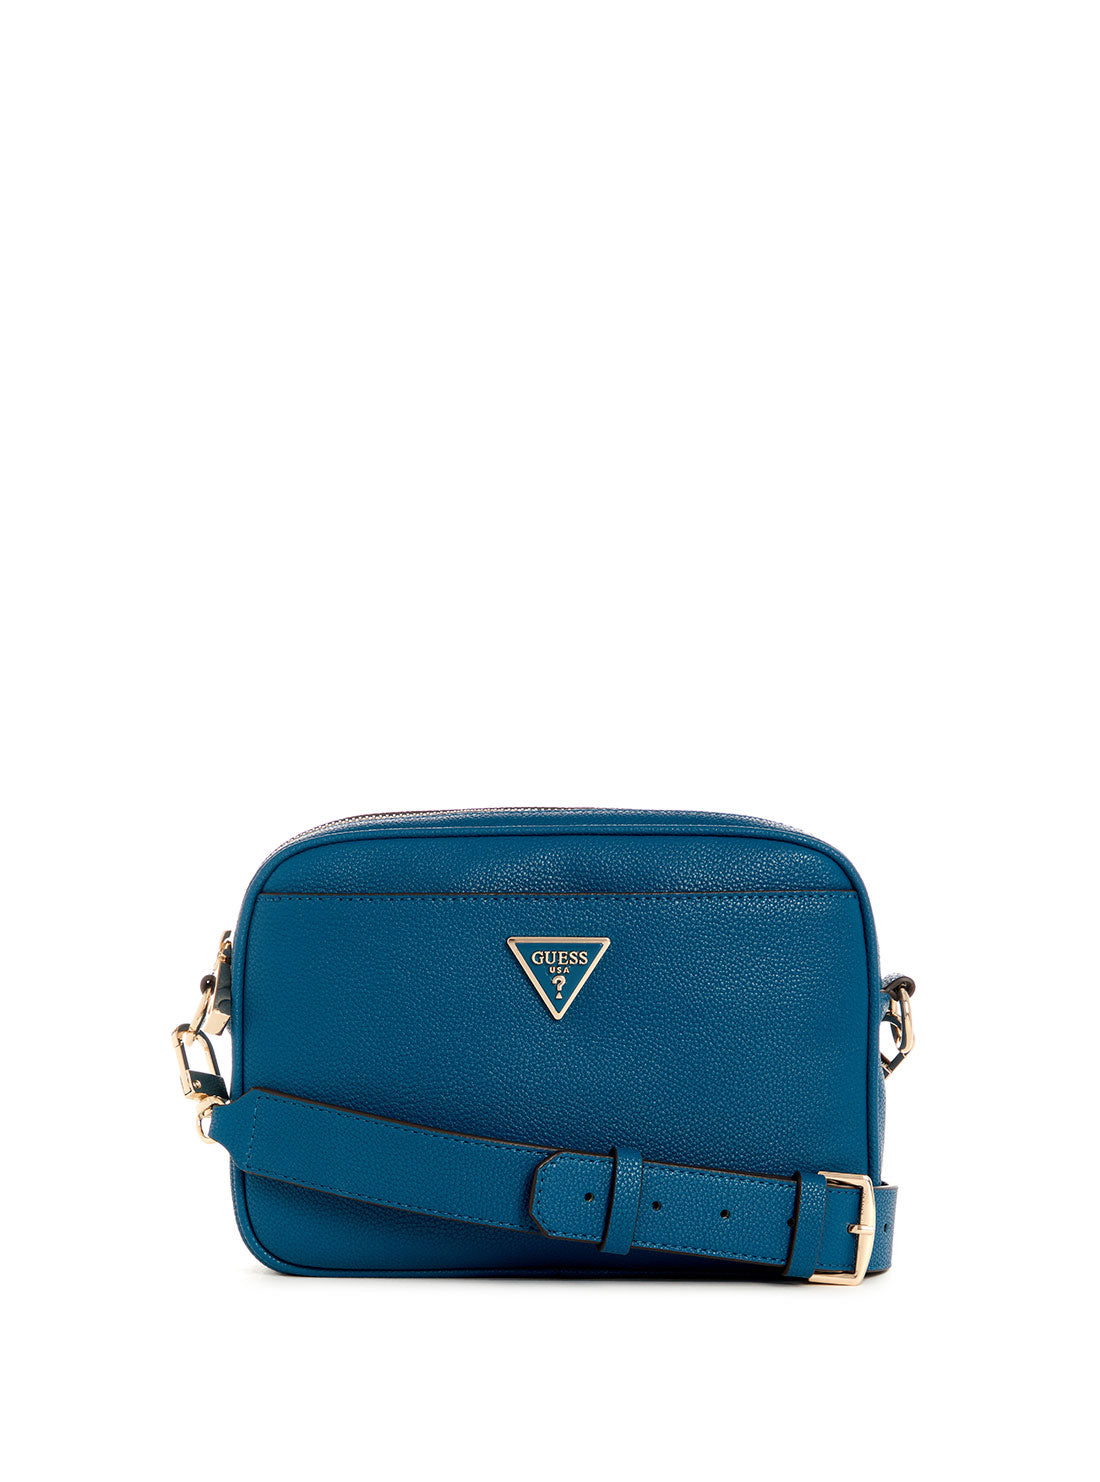 GUESS Blue Meridian Camera Bag front view